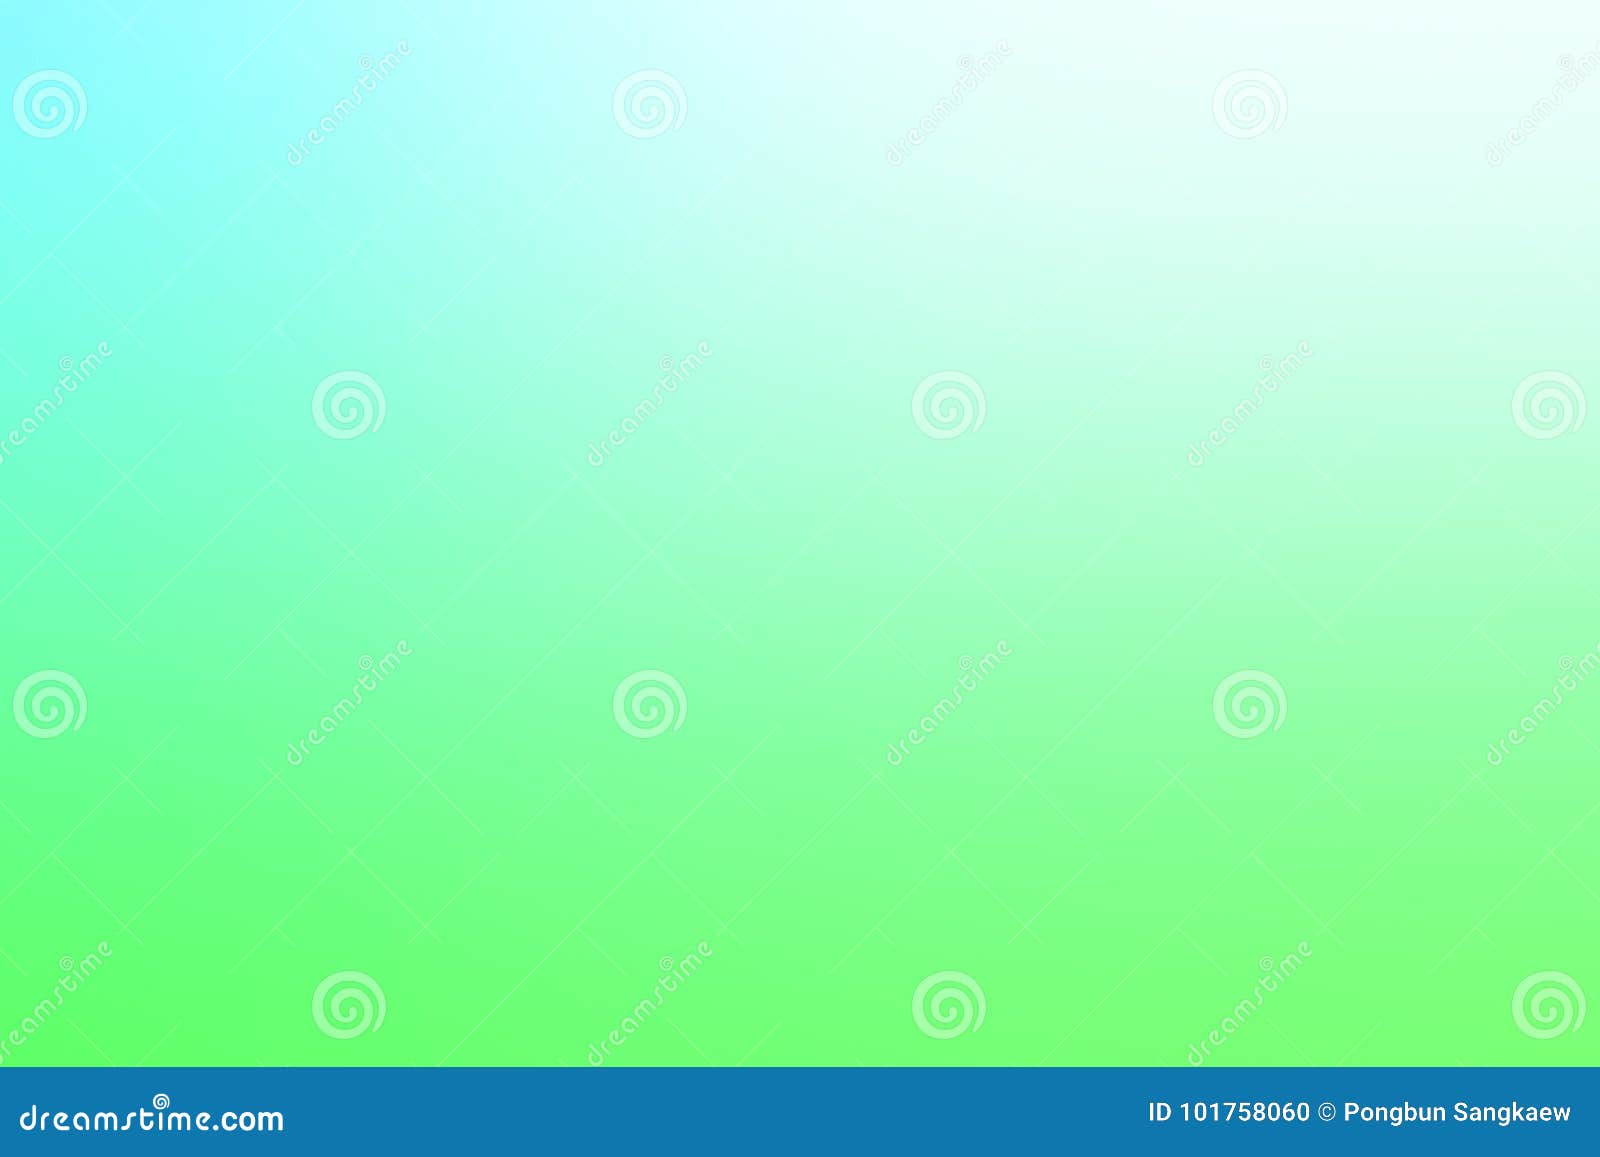 Blue and Light Green Gradient Background Stock Photo - Image of beautiful,  gradient: 101758060